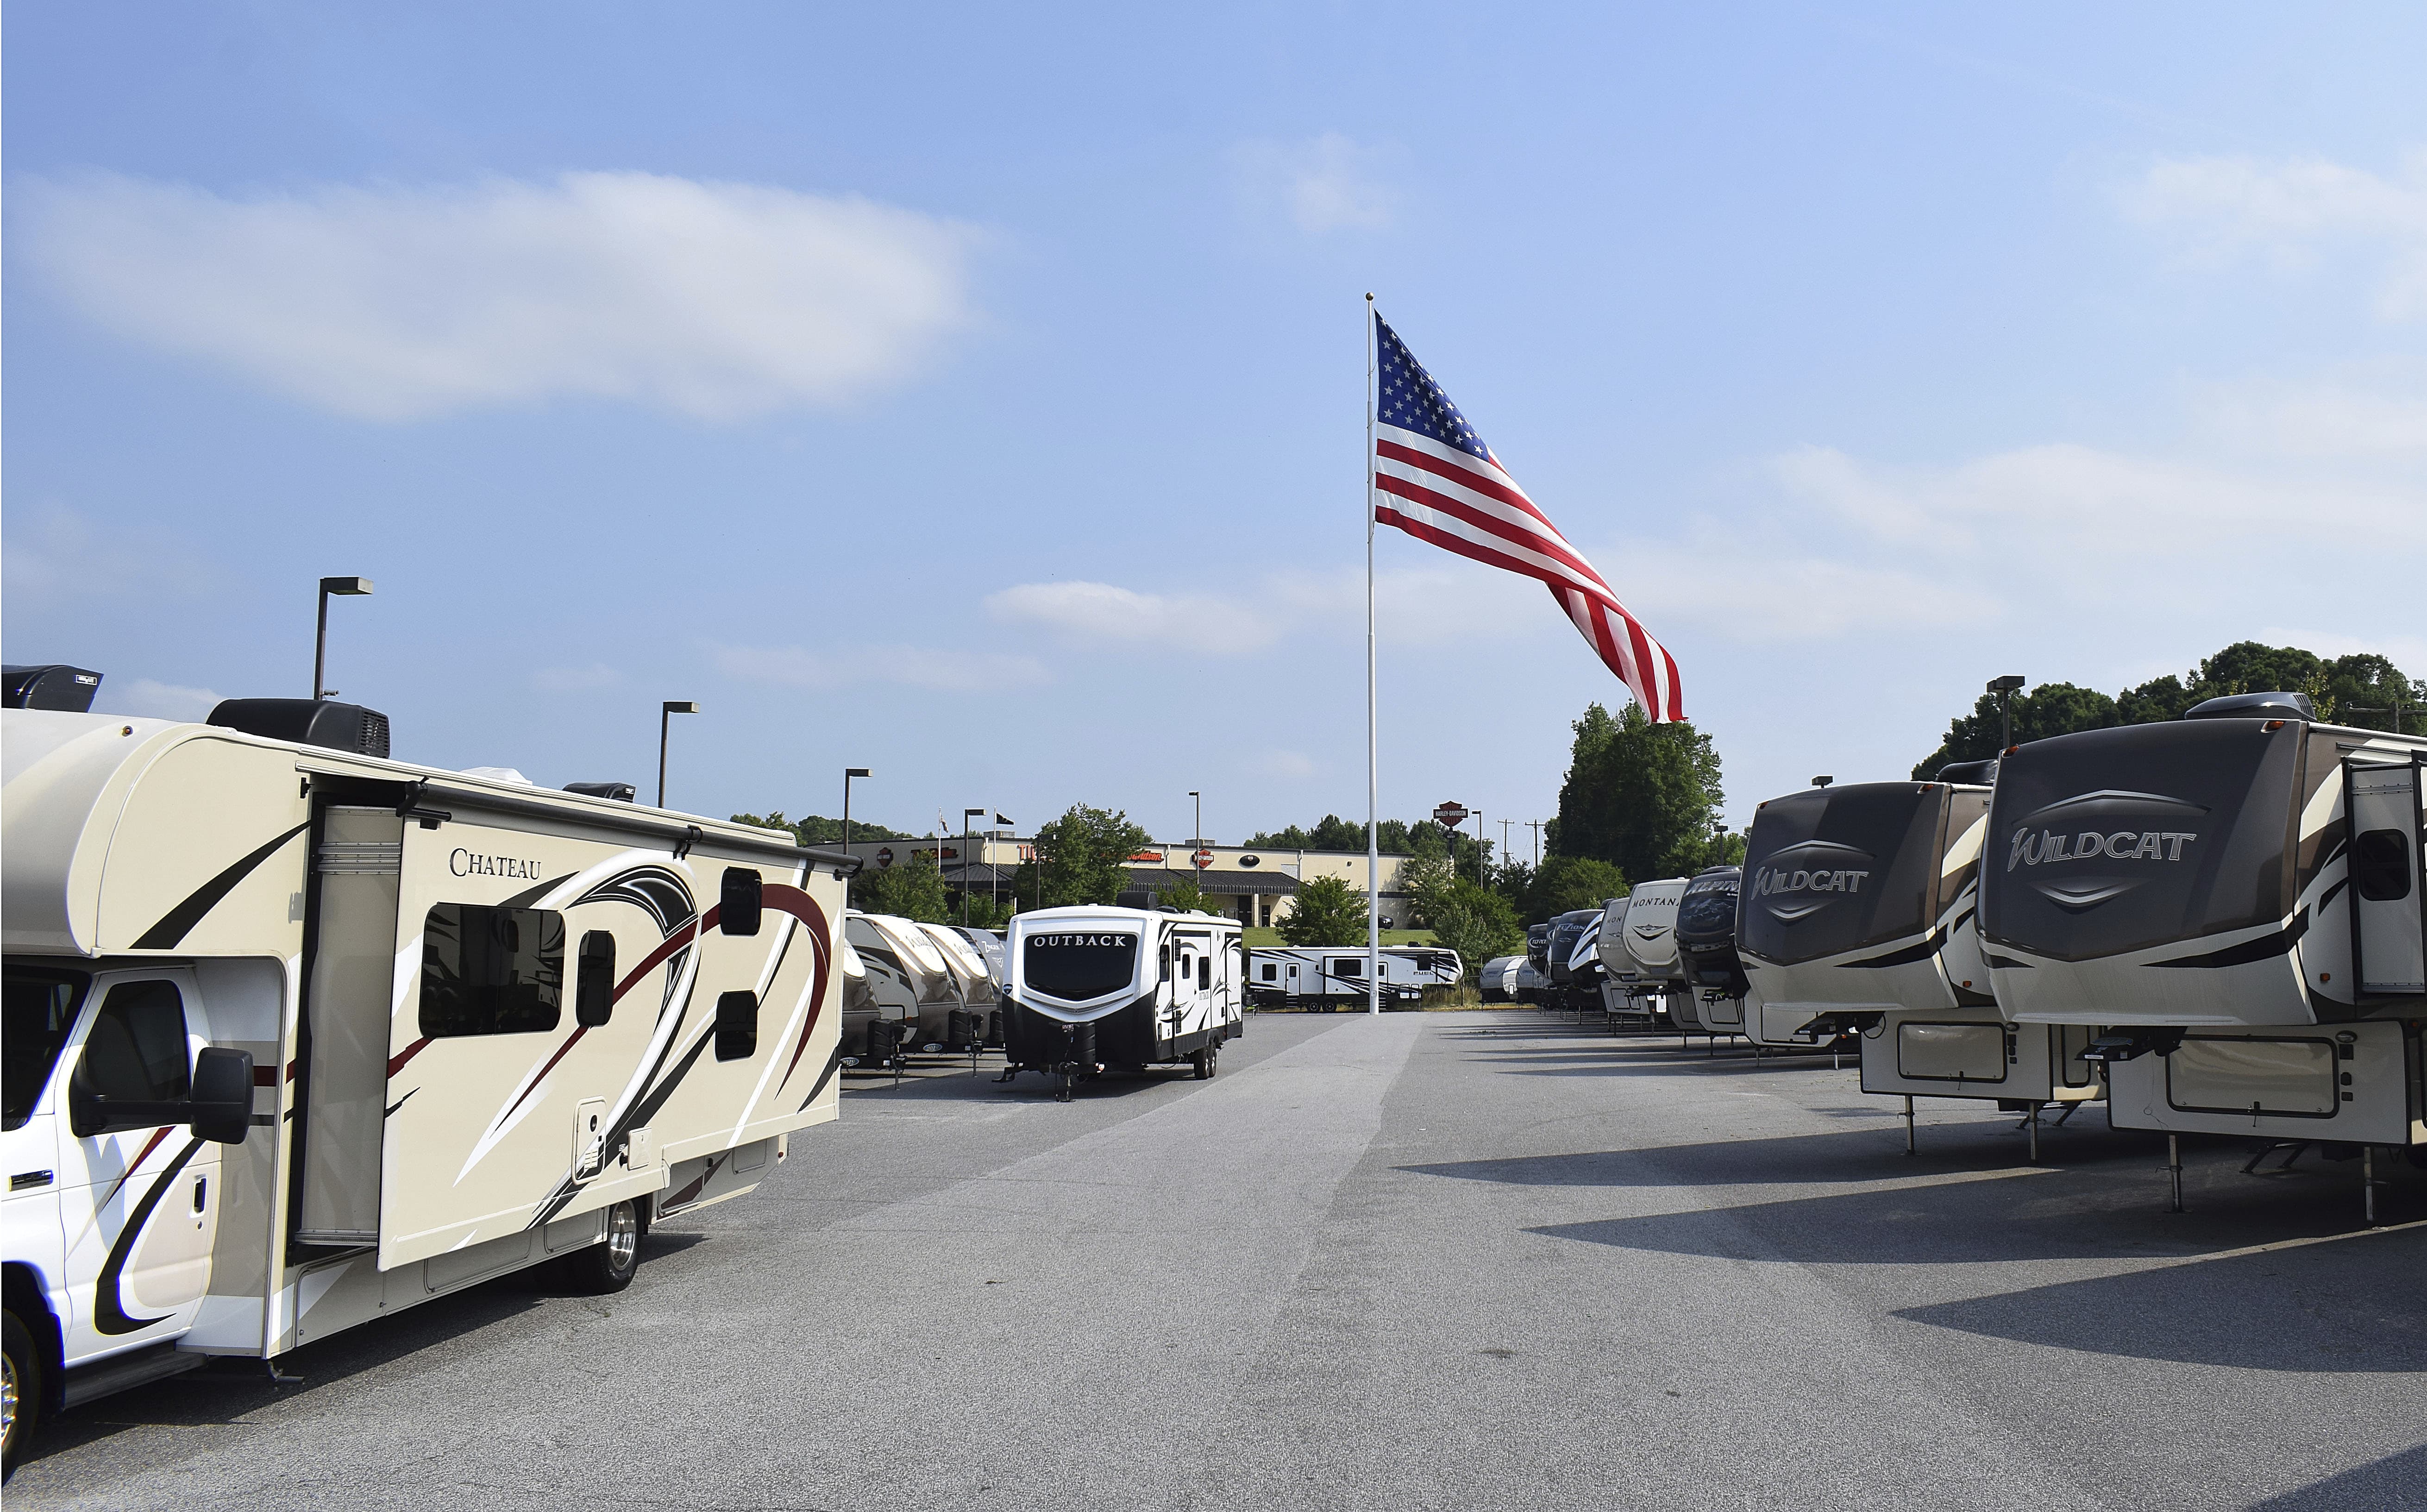 A giant American flag that's been at the center of a local controversy blows in the wind at Gander RV, in Statesville, N.C. The North Carolina city has voted against the flying of really big flags, holding its ground against reality TV star Marcus Lemonis' huge Stars and Stripes. (Jennifer Munday/Camping World via AP)